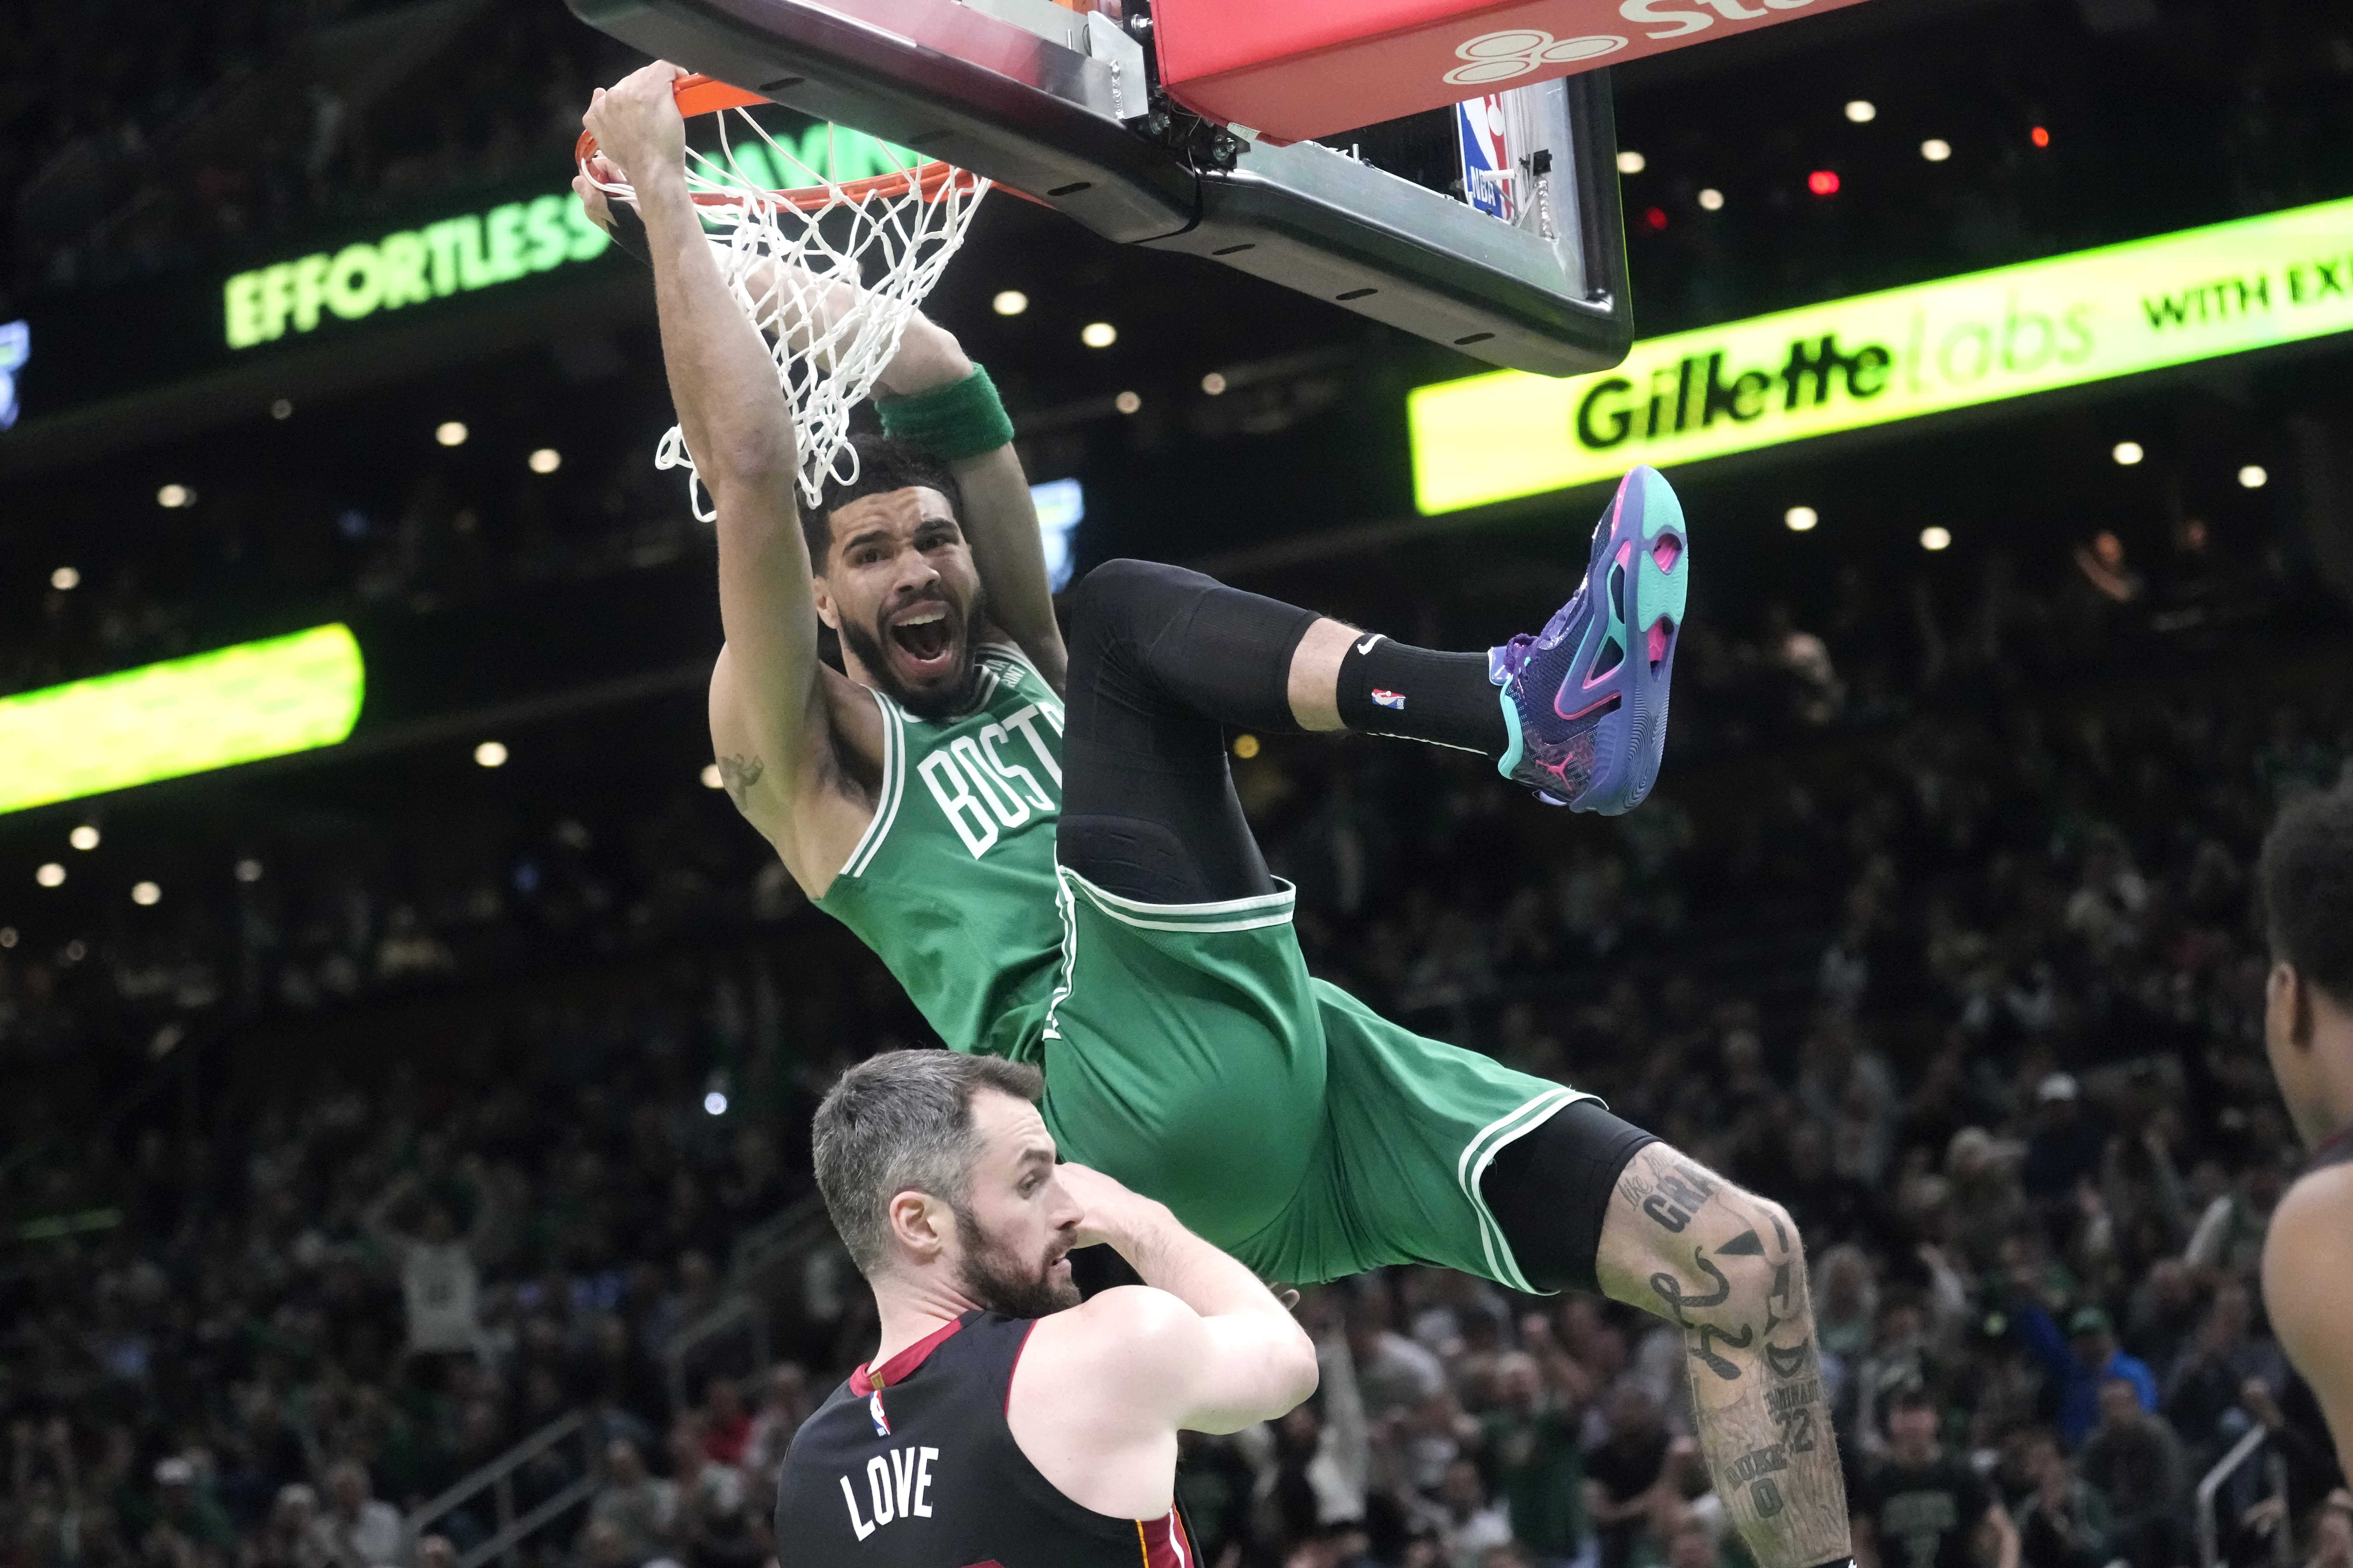 How to Watch the NBA Playoffs today - May 27 Boston Celtics vs